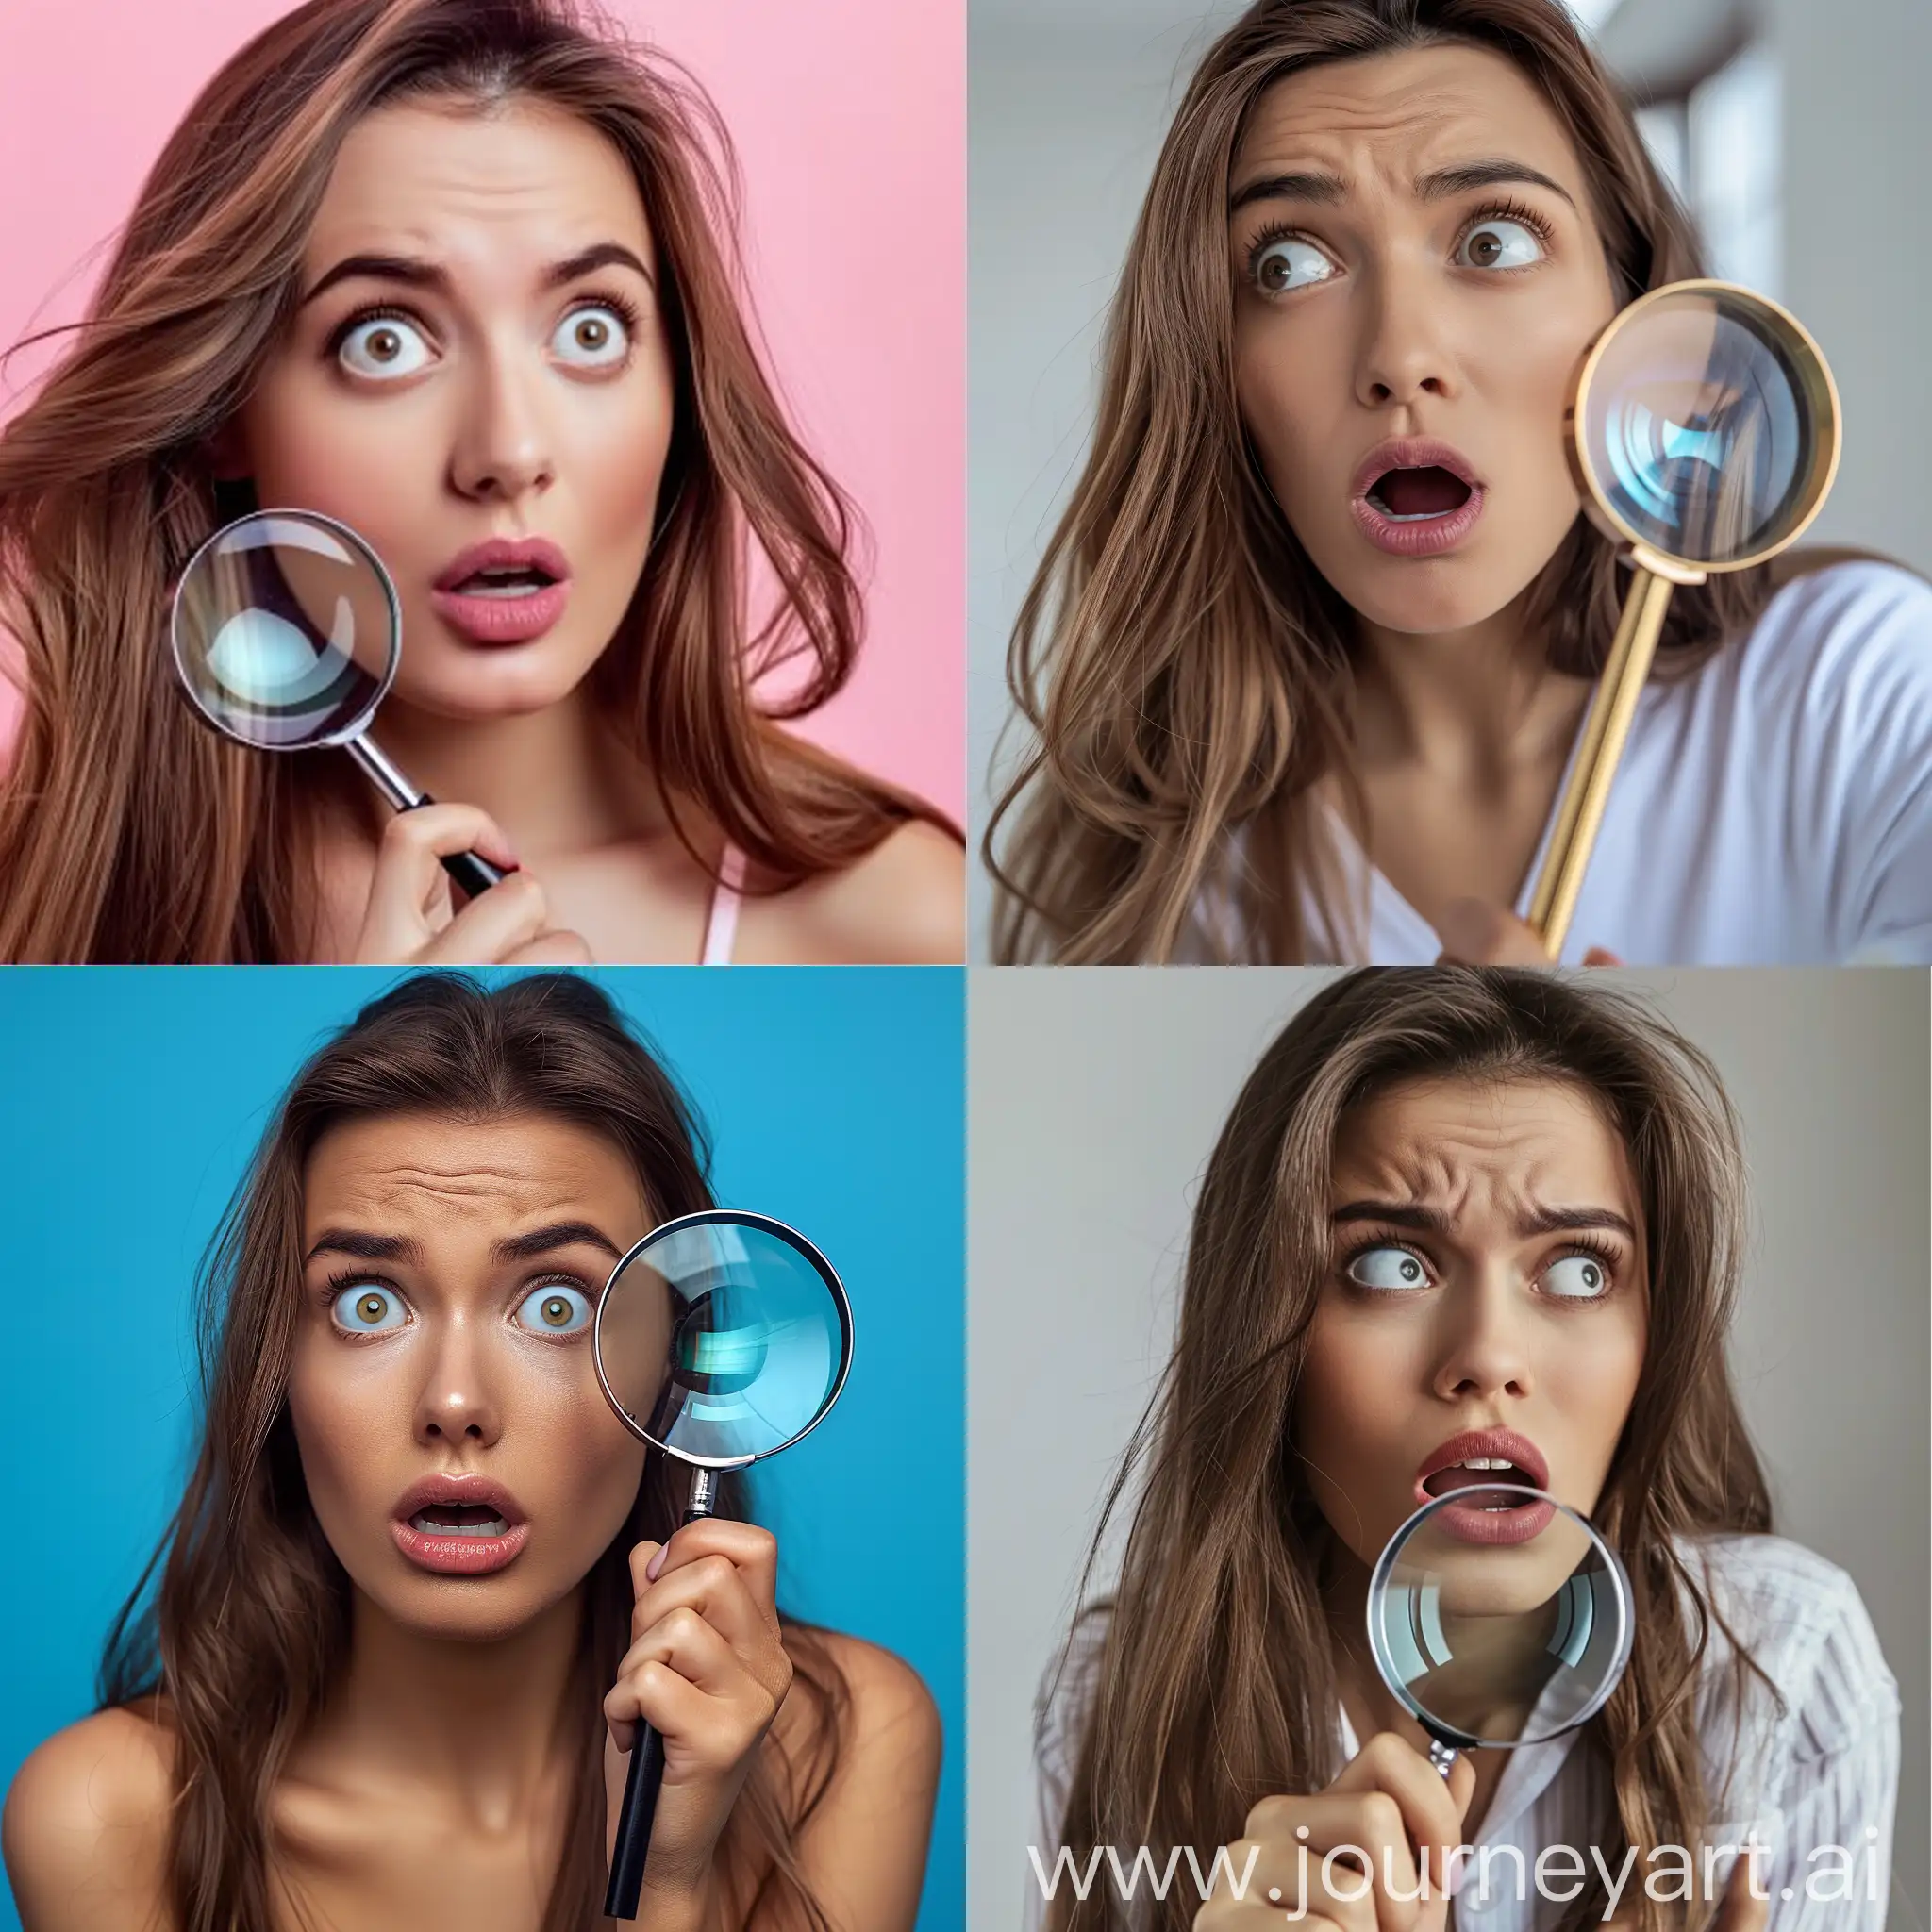 a clear face of a pretty female with a light skin and long brown hair with a very a very expressive and surprised look on her face looking straight at you with a magnifying glass in her hand, helding it next to her head not fading background in hd/4k